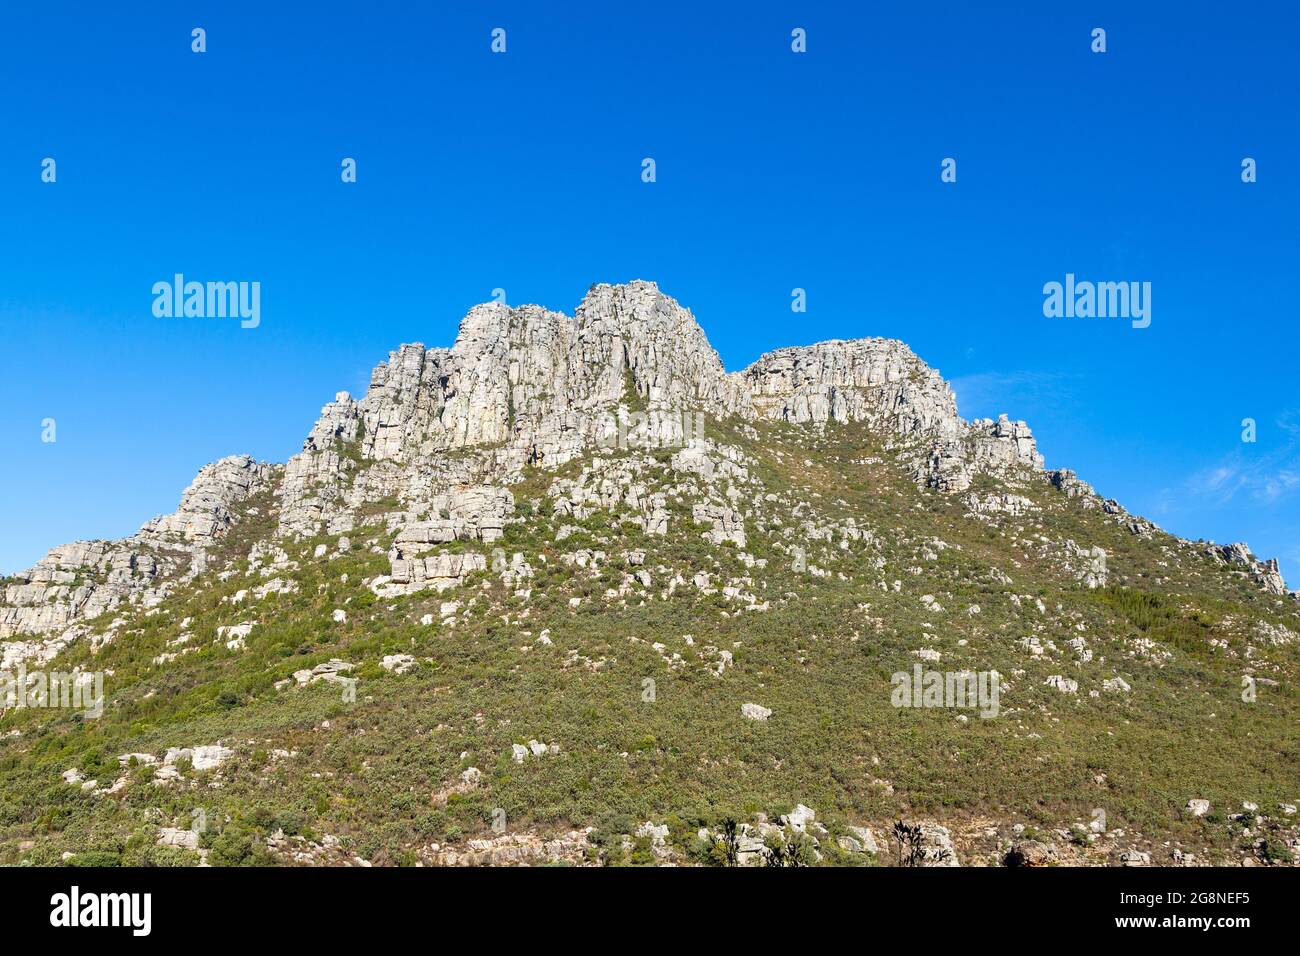 Landscape in the Bain's, Western Cape of South Africa Stock Photo